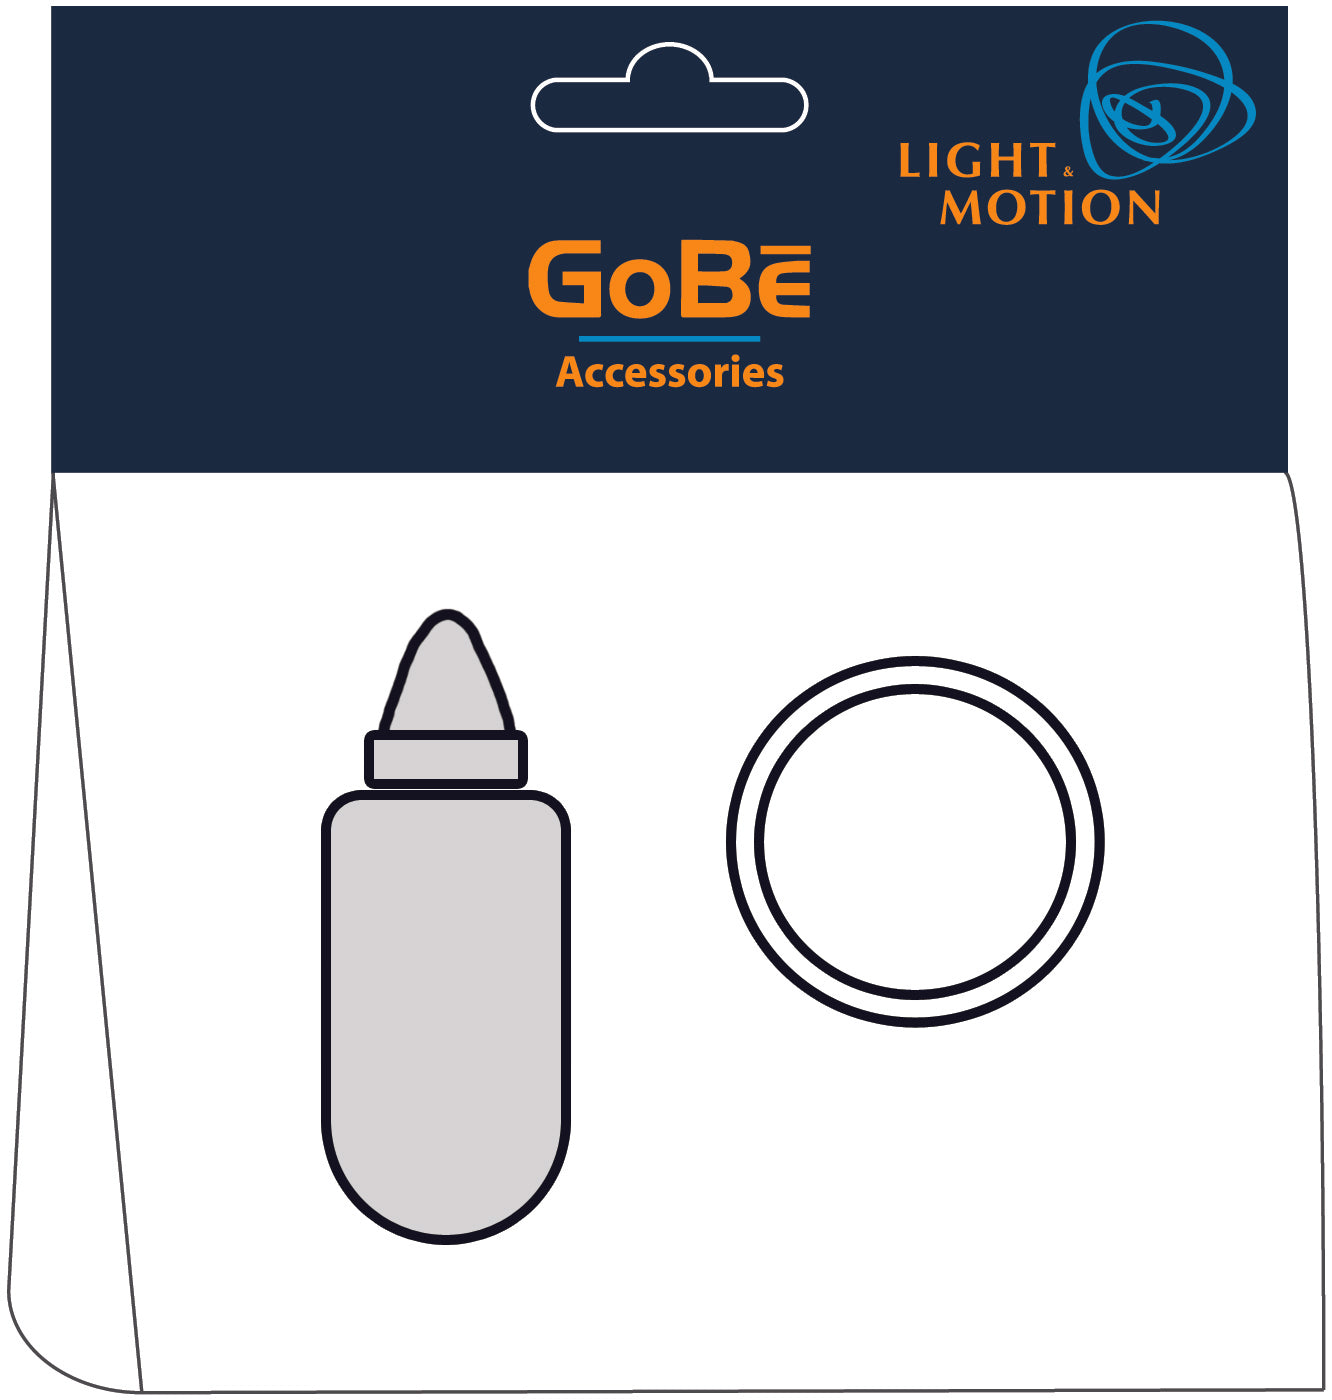 Light and Motion GoBe O-Ring and Grease